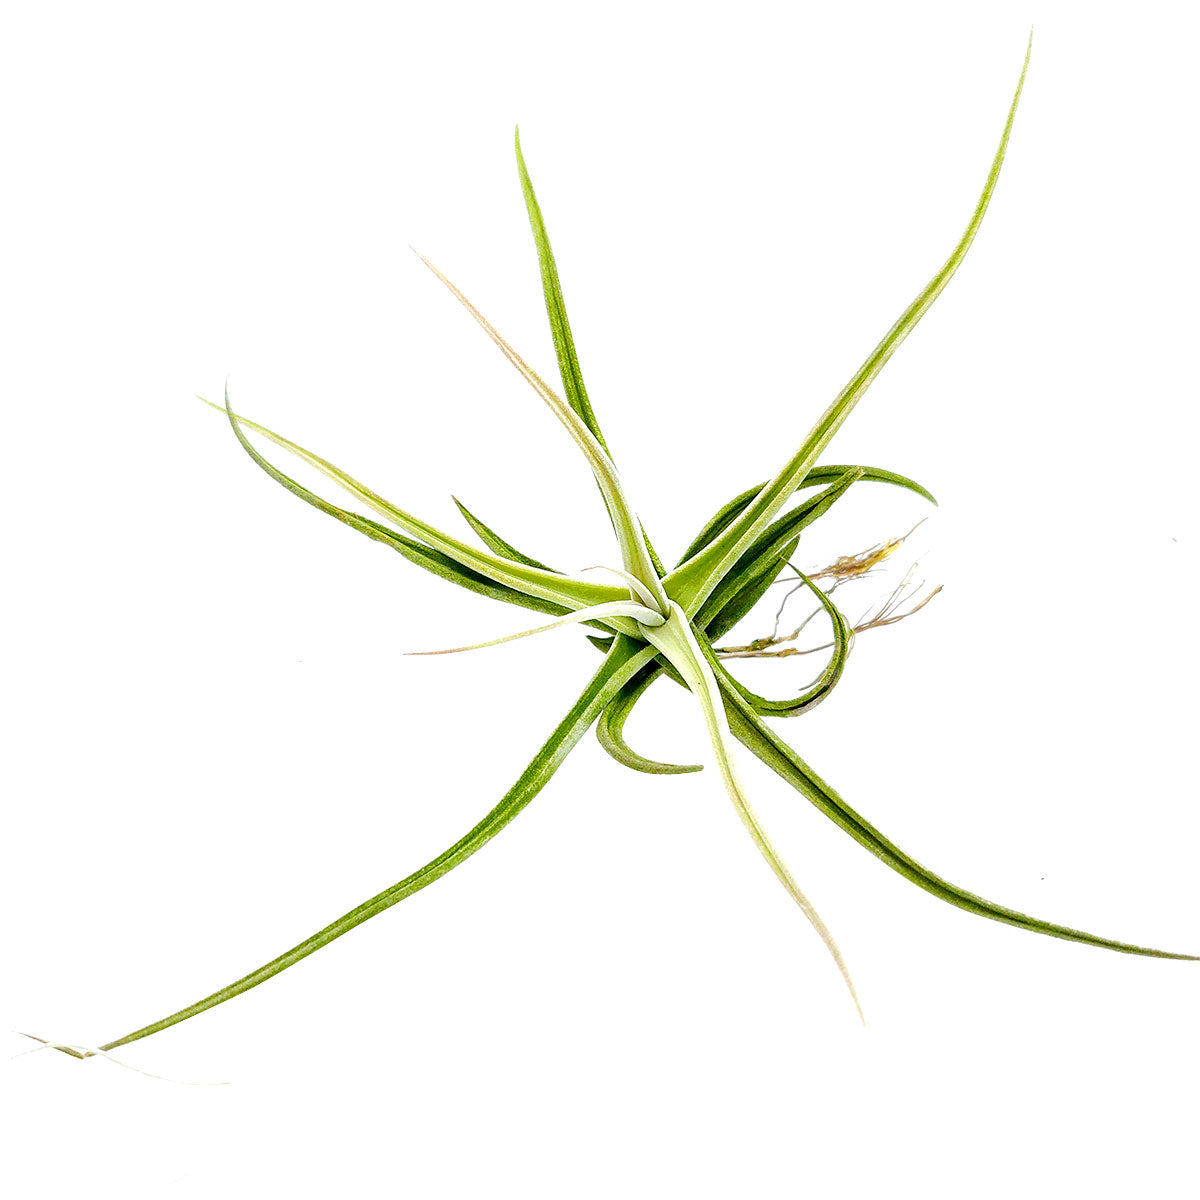 Tillandsia Glabrior Air Plant for sale, How to care for Tillandsia Glabrior Air Plant, How to grow Tillandsia Glabrior Air Plant indoor, Air plants gift ideas, Air plants home decor ideas, Live air plants for gifts